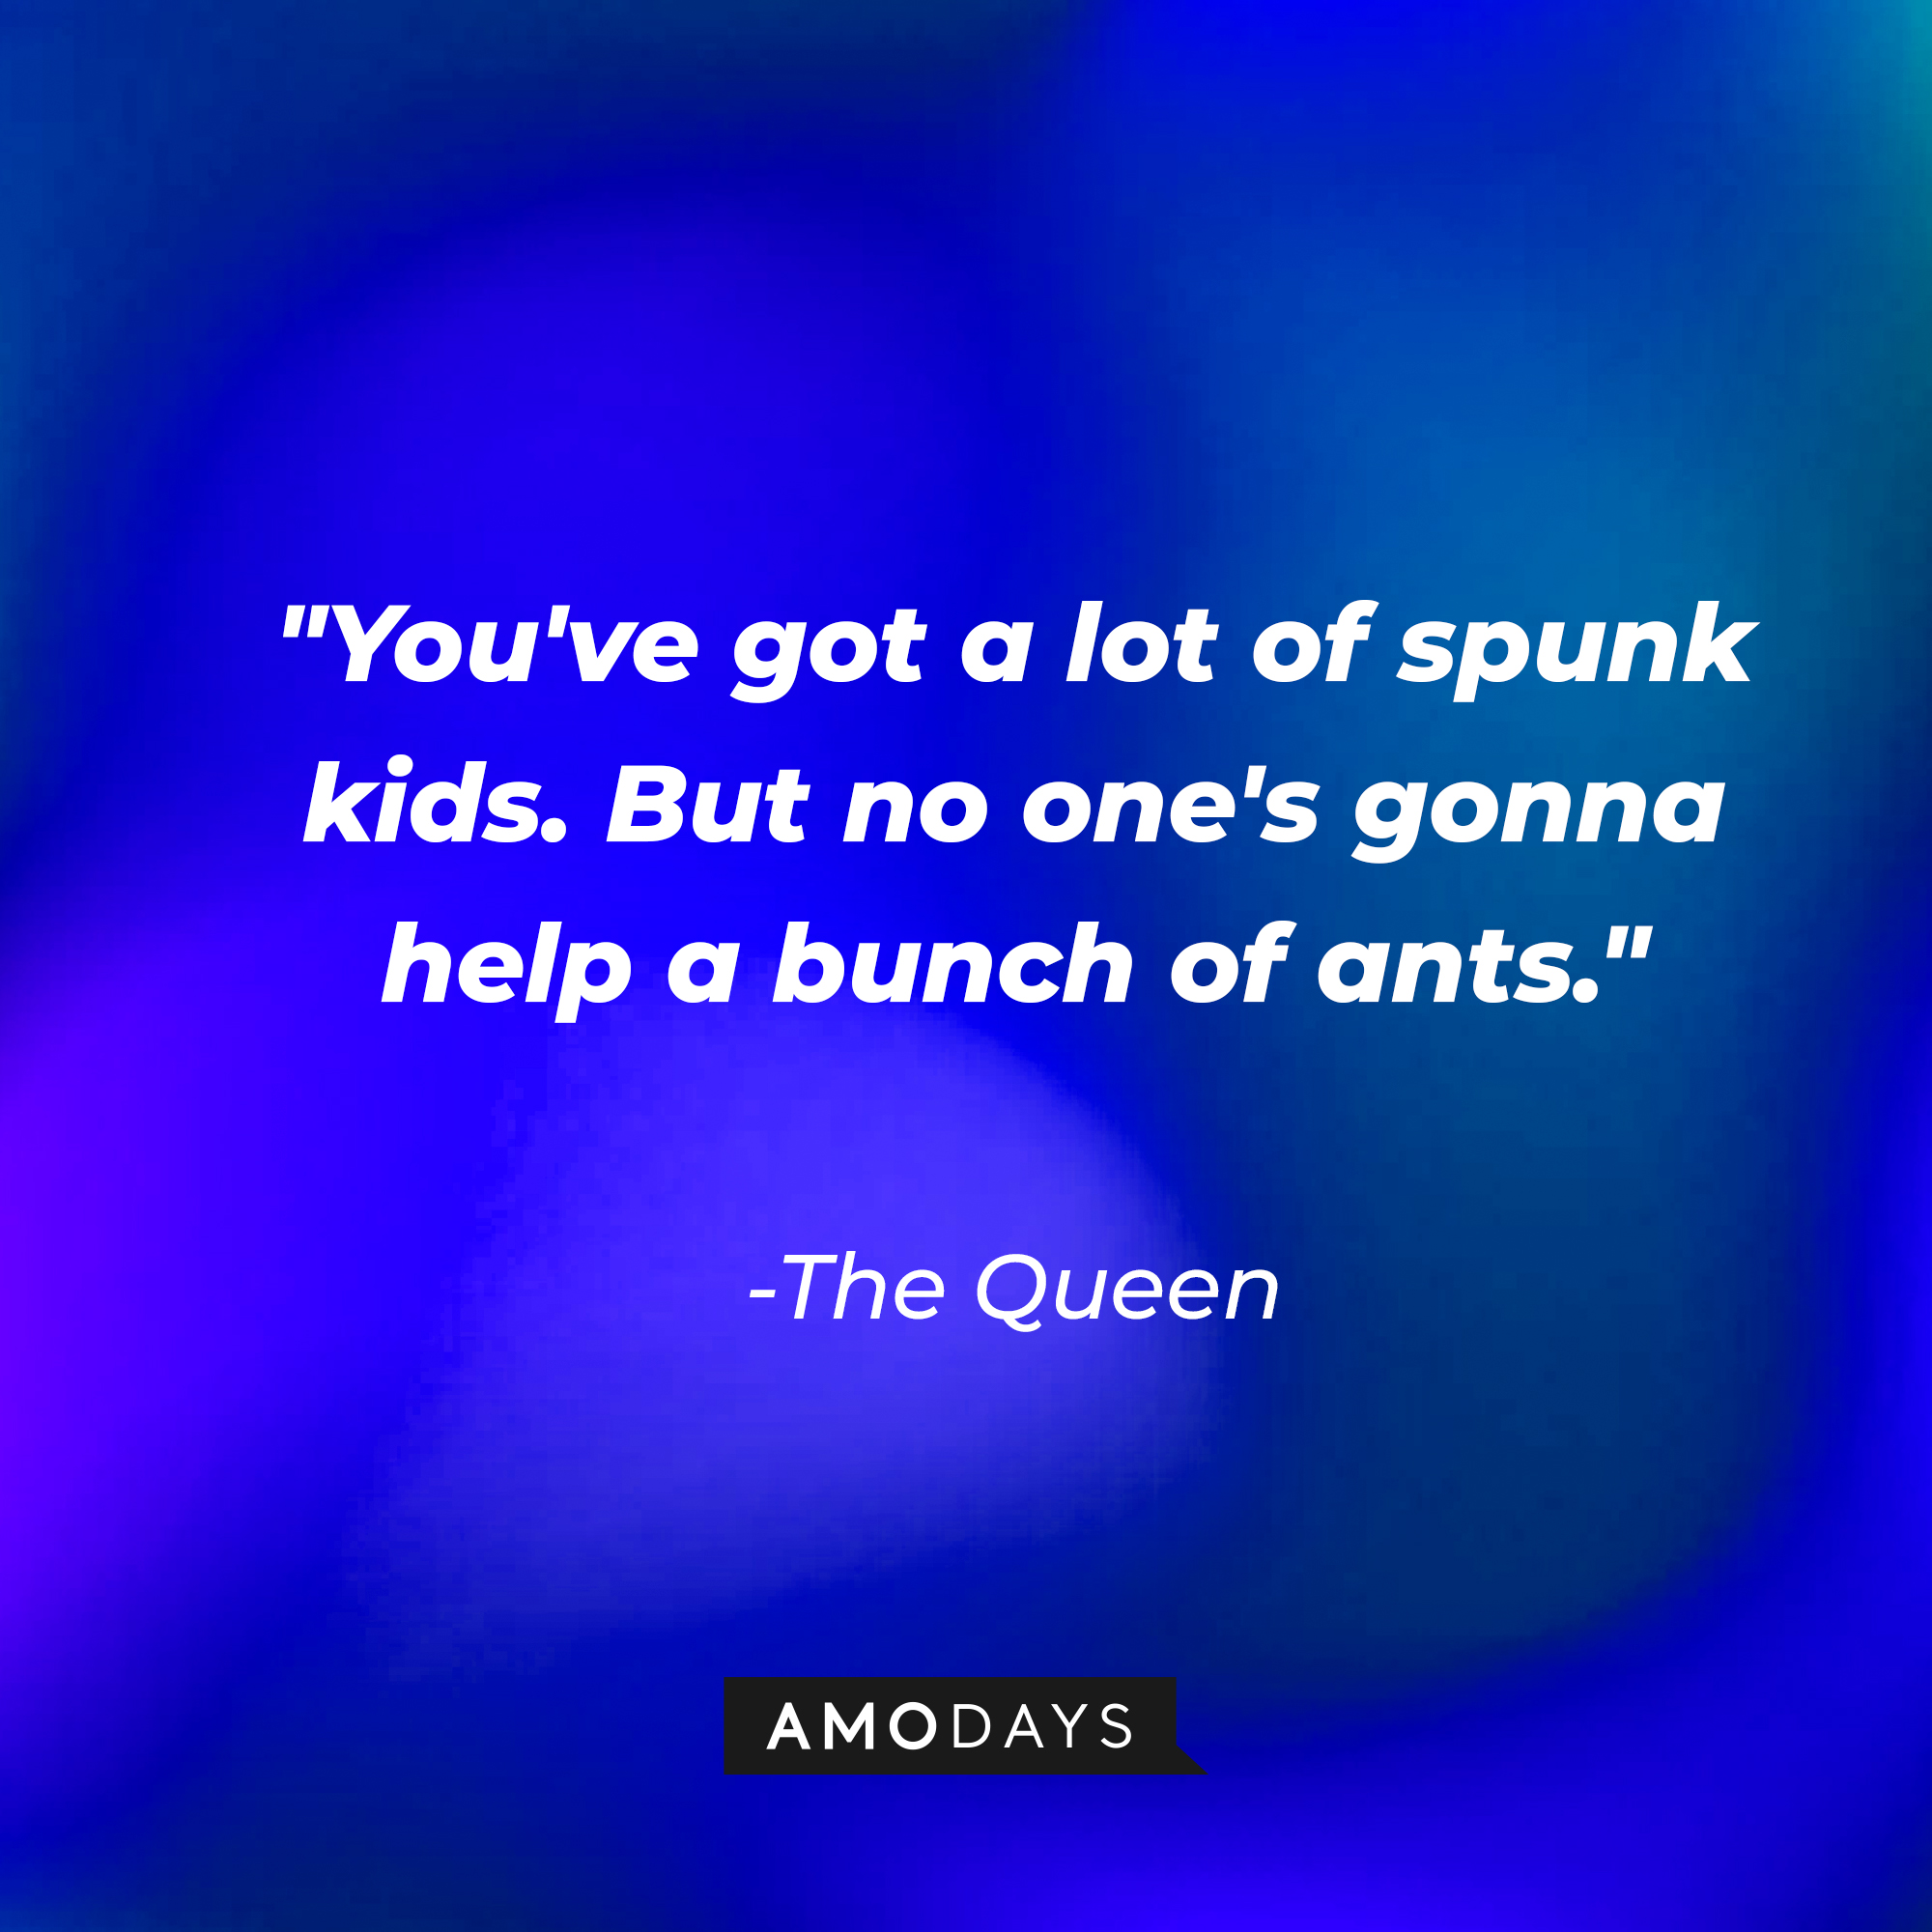 The Queen's quote: "You've got a lot of spunk kids. But no one's gonna help a bunch of ants." | Source: AmoDays